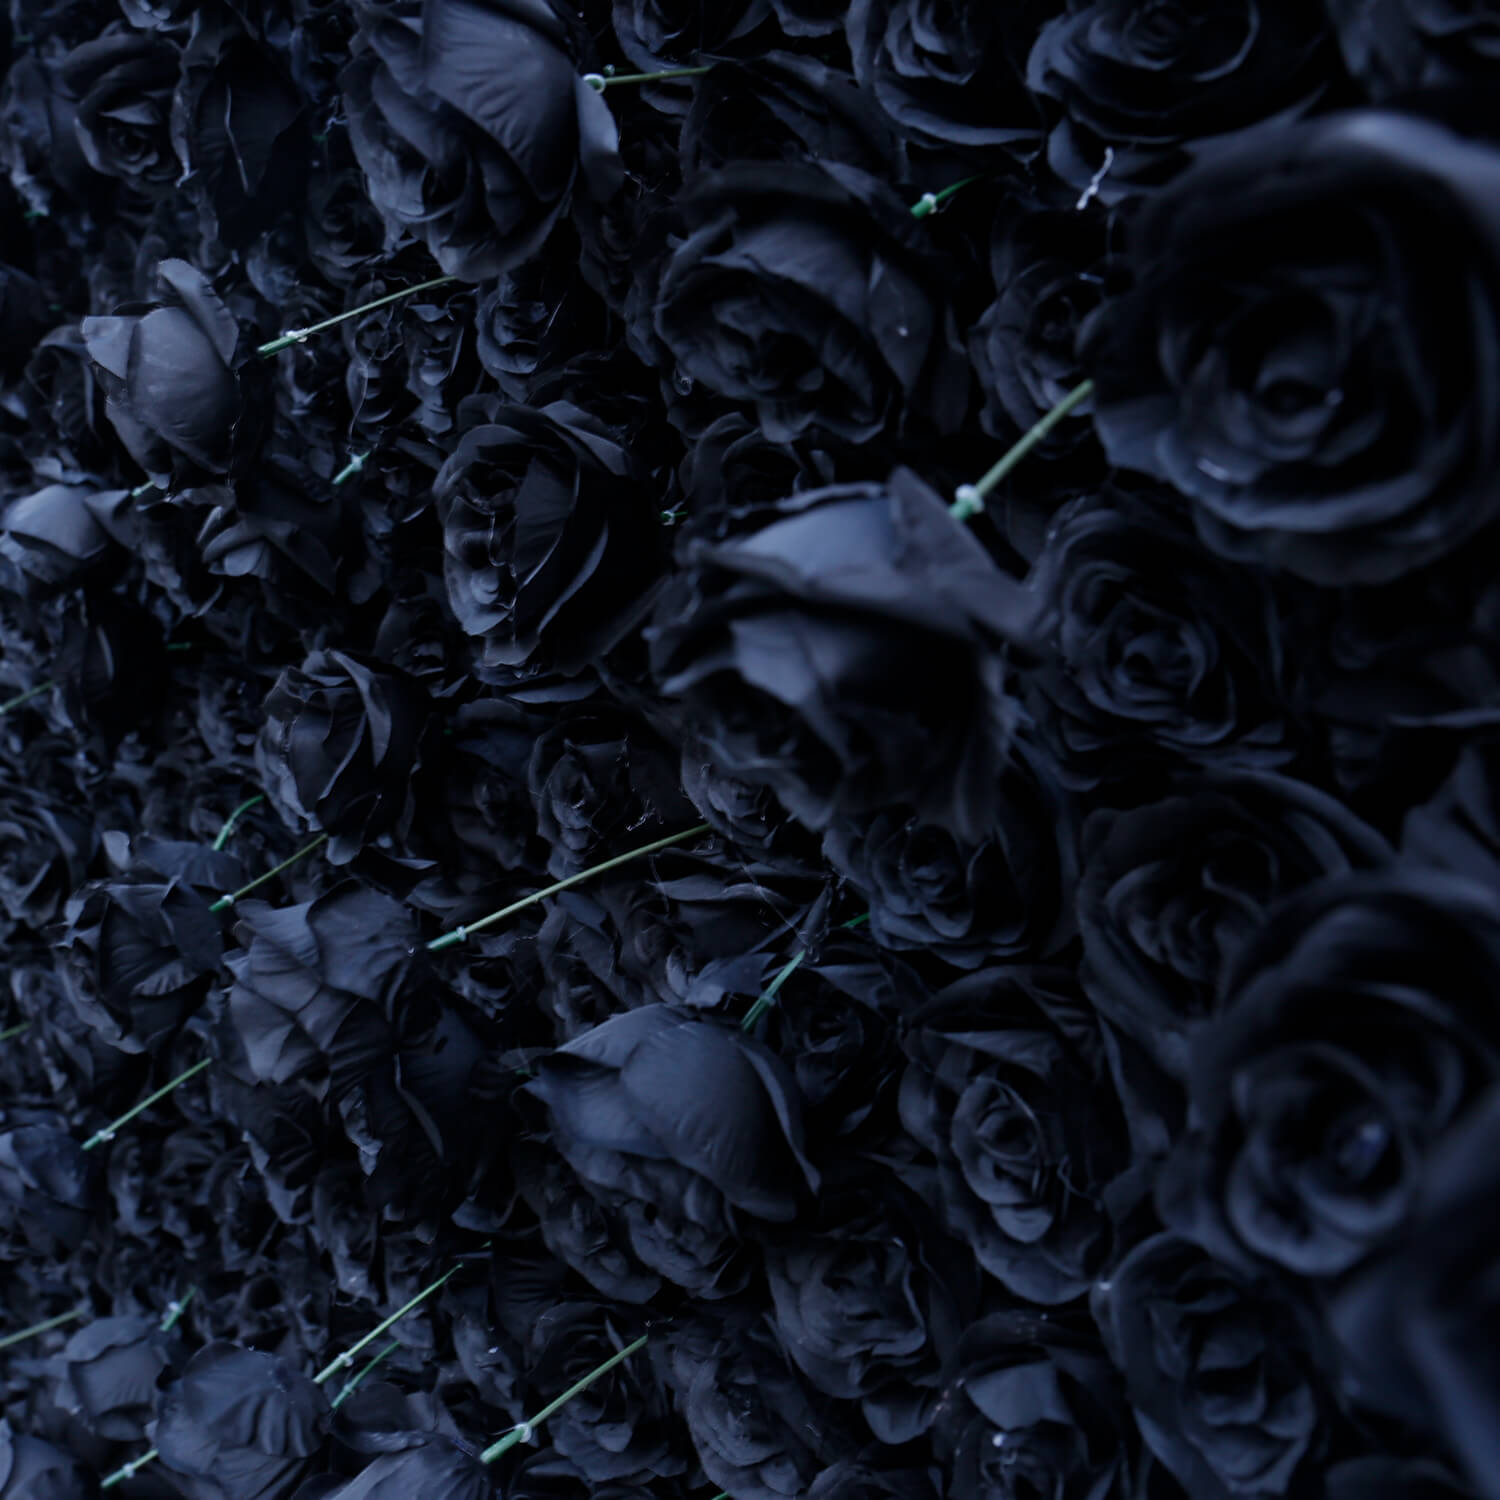 Black Rose Flower Wall Backdrop for Birthday Party Decorations-ubackdrop